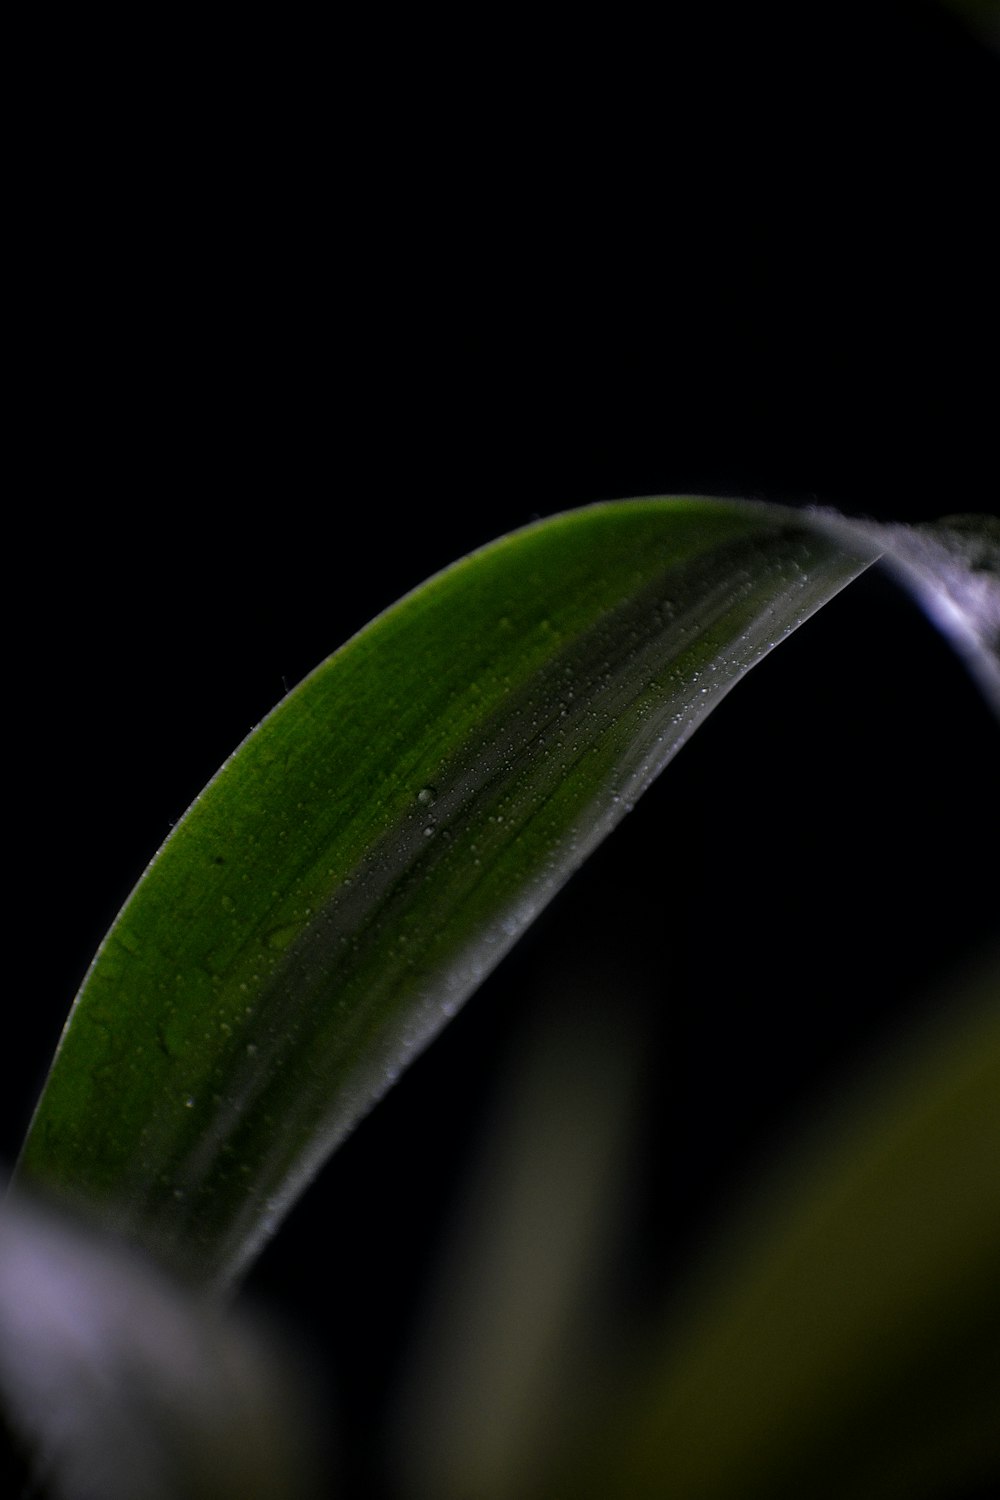 a close up of a plant with a black background